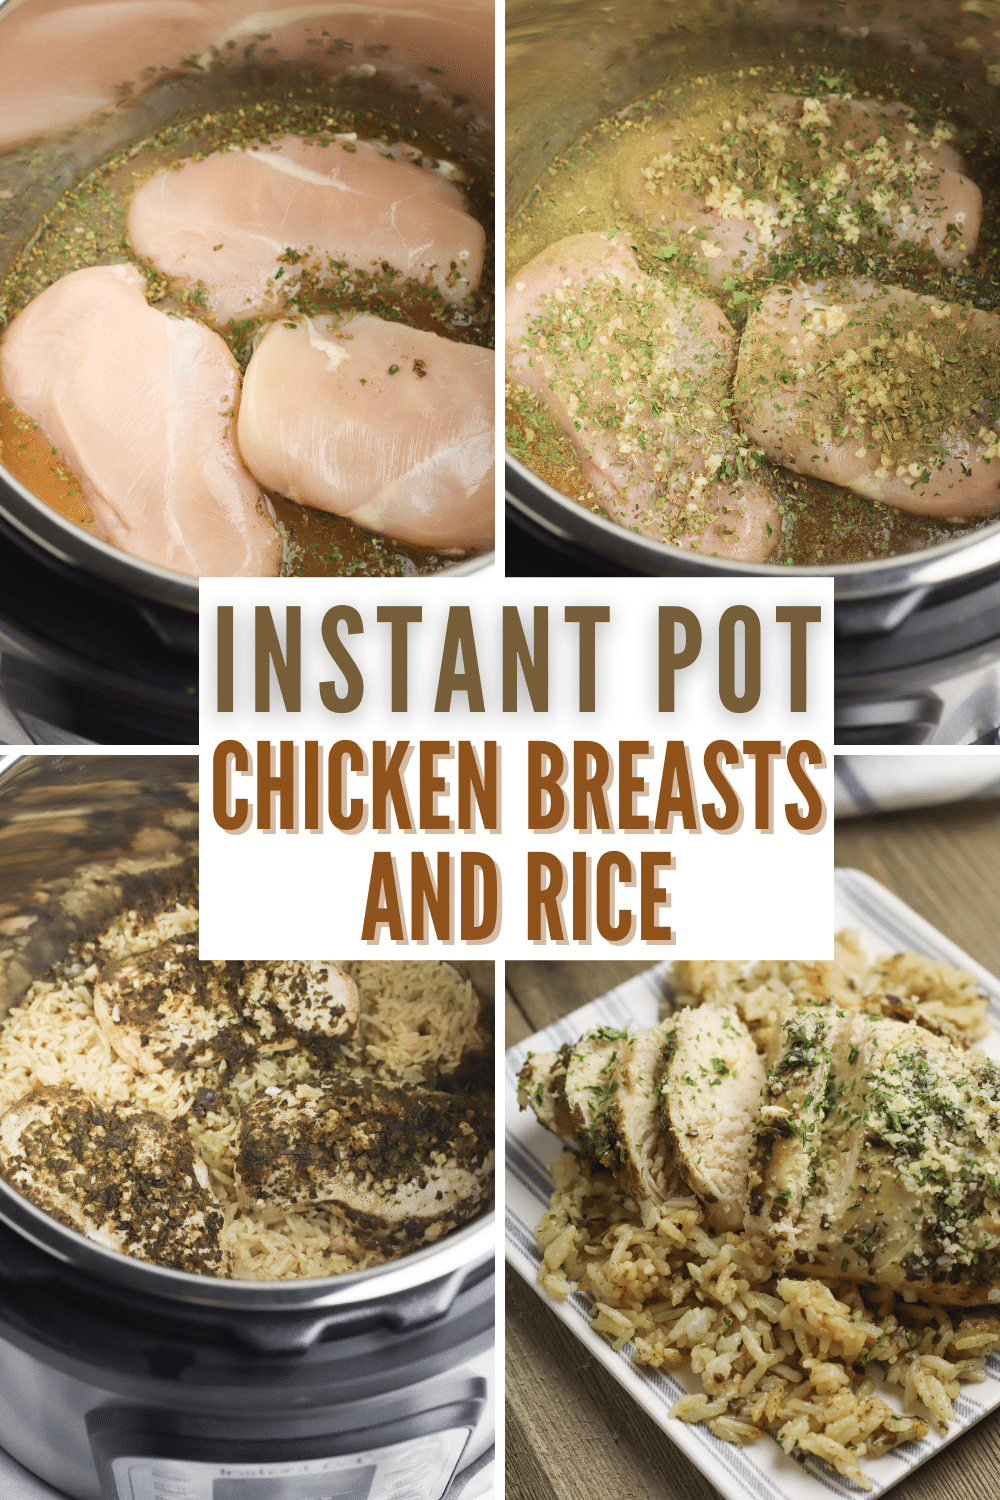 If you’re looking for an easy, delicious, and healthy chicken and rice recipe, this Instant Pot Chicken Breasts and Rice is a great option. #instantpot #pressurecooker #chickenandrice #chicken #rice via @wondermomwannab